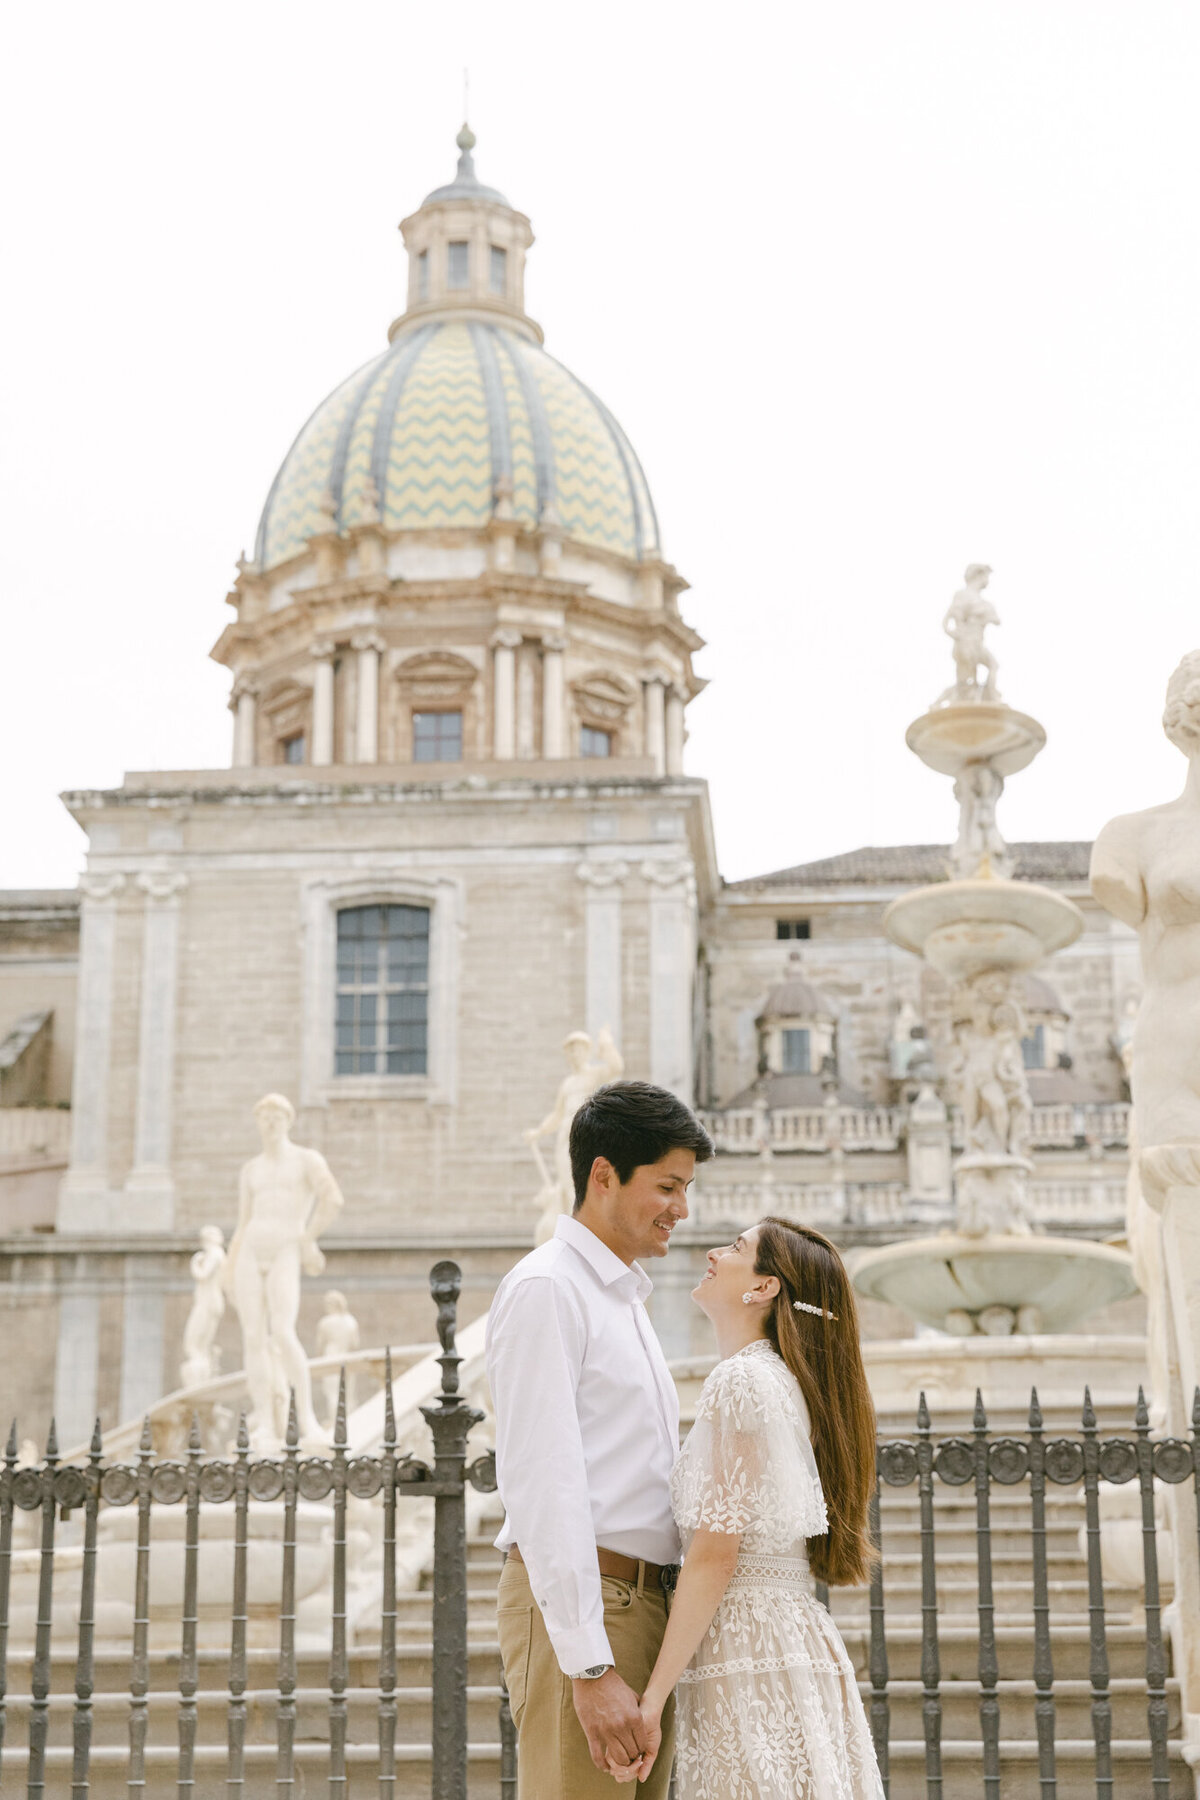 PERRUCCIPHOTO_PALERMO_SICILY_ENGAGEMENT_37